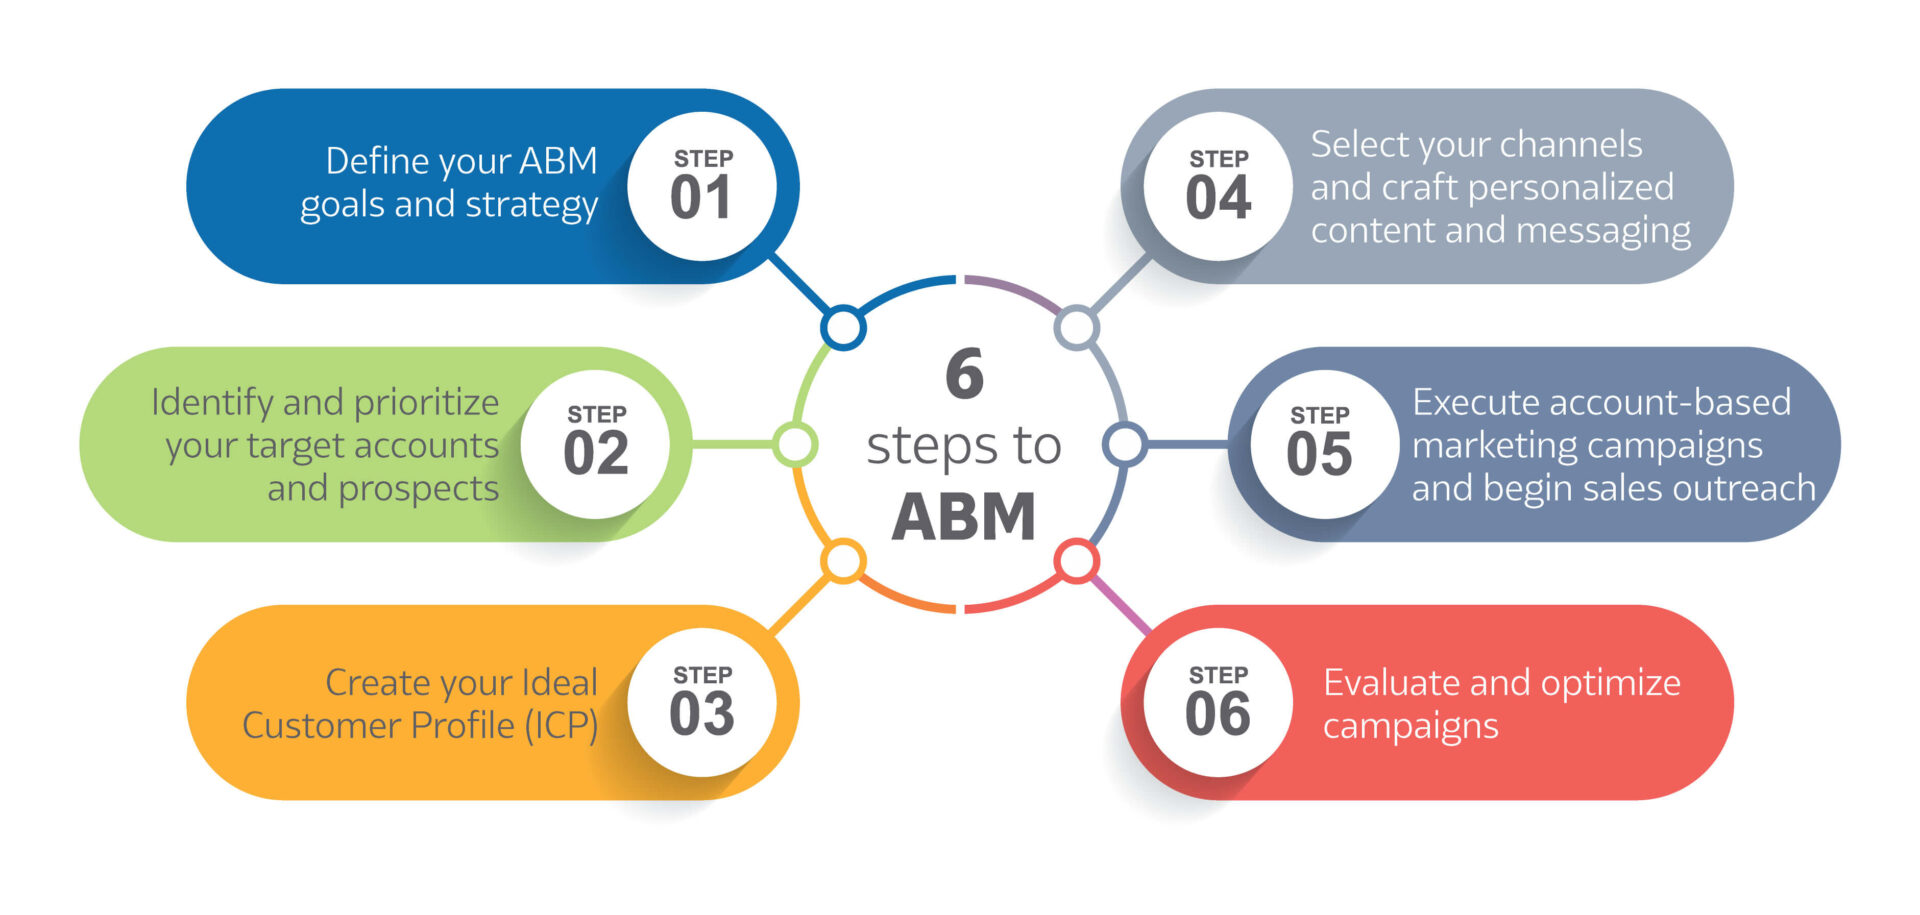 How to transition to ABM marketing